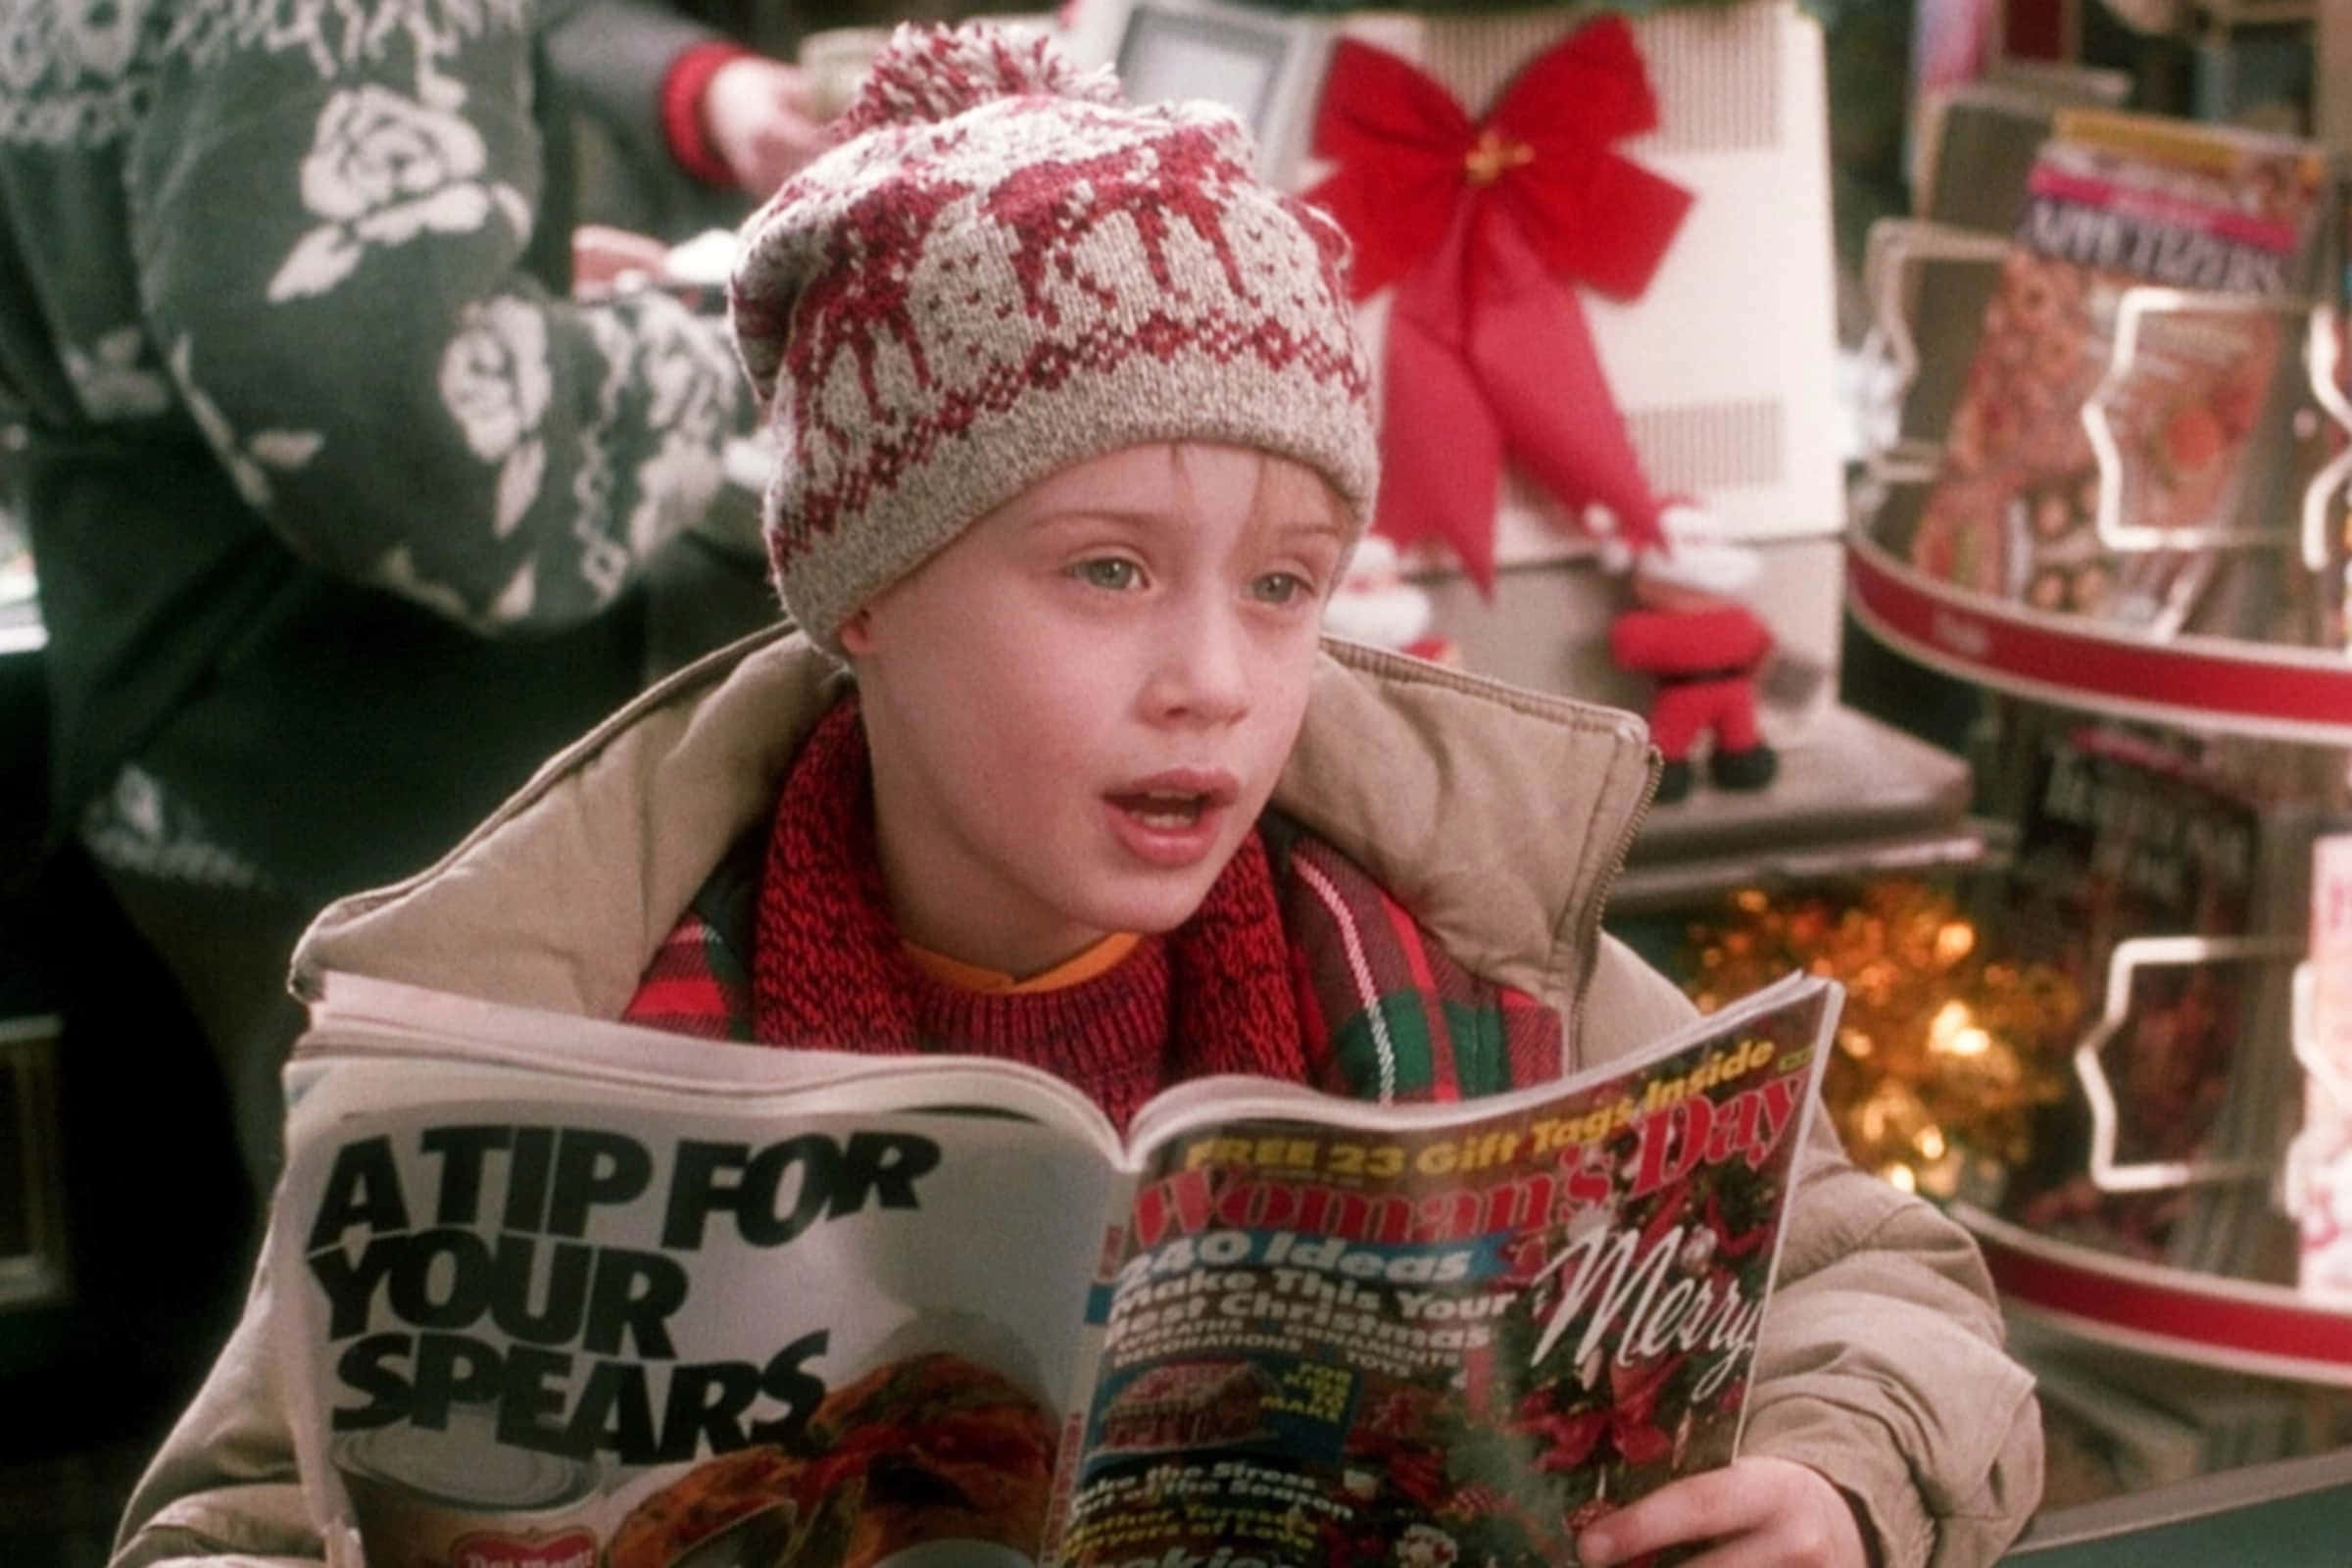 An up-close look of Kevin McCallister in "Home Alone".